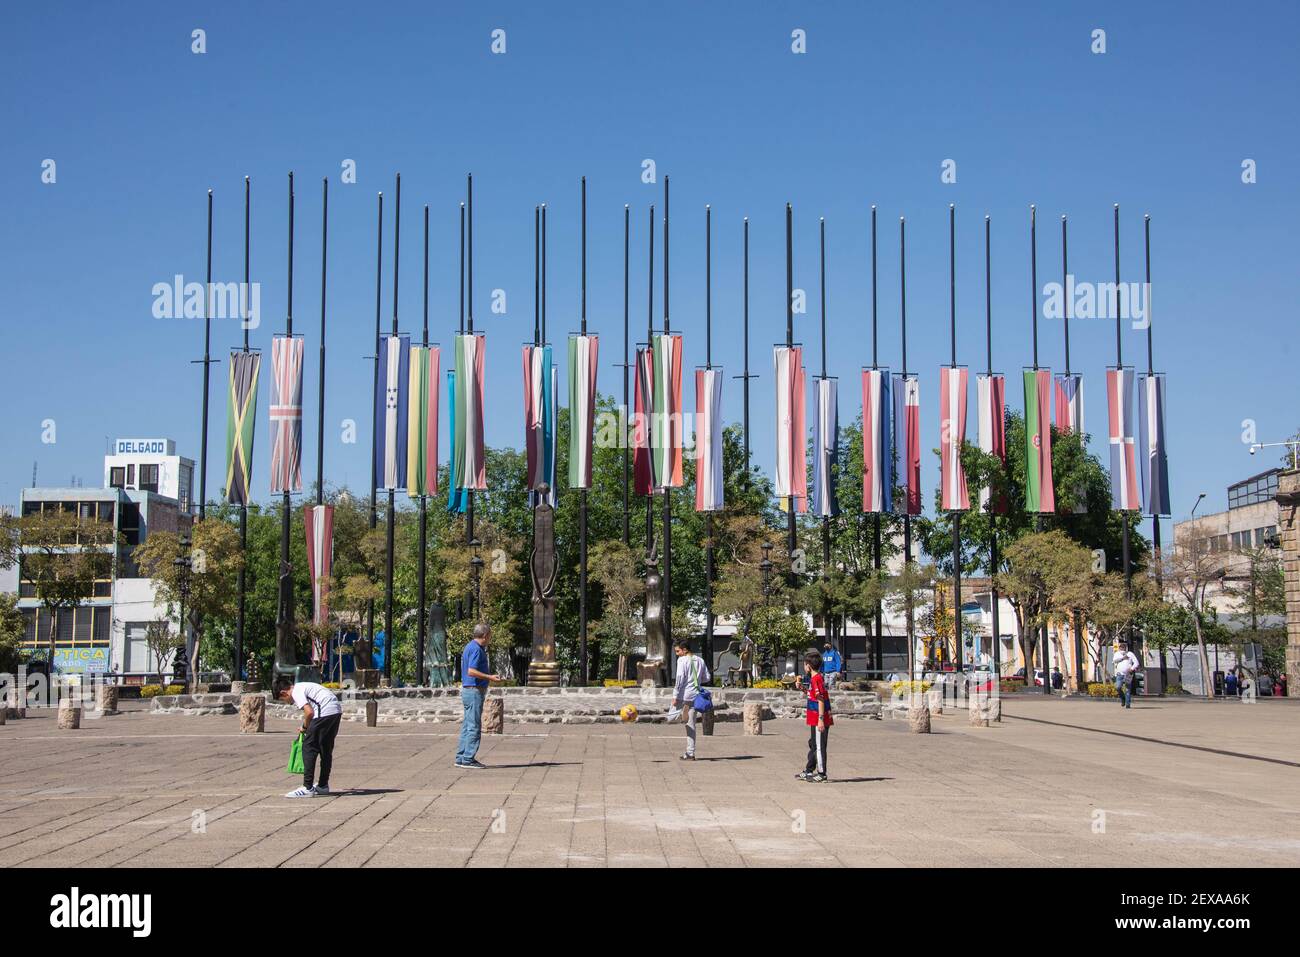 Flags in front of Cultural Institute Museo Cabañas, Guadalajara, Jalisco, Mexico Stock Photo